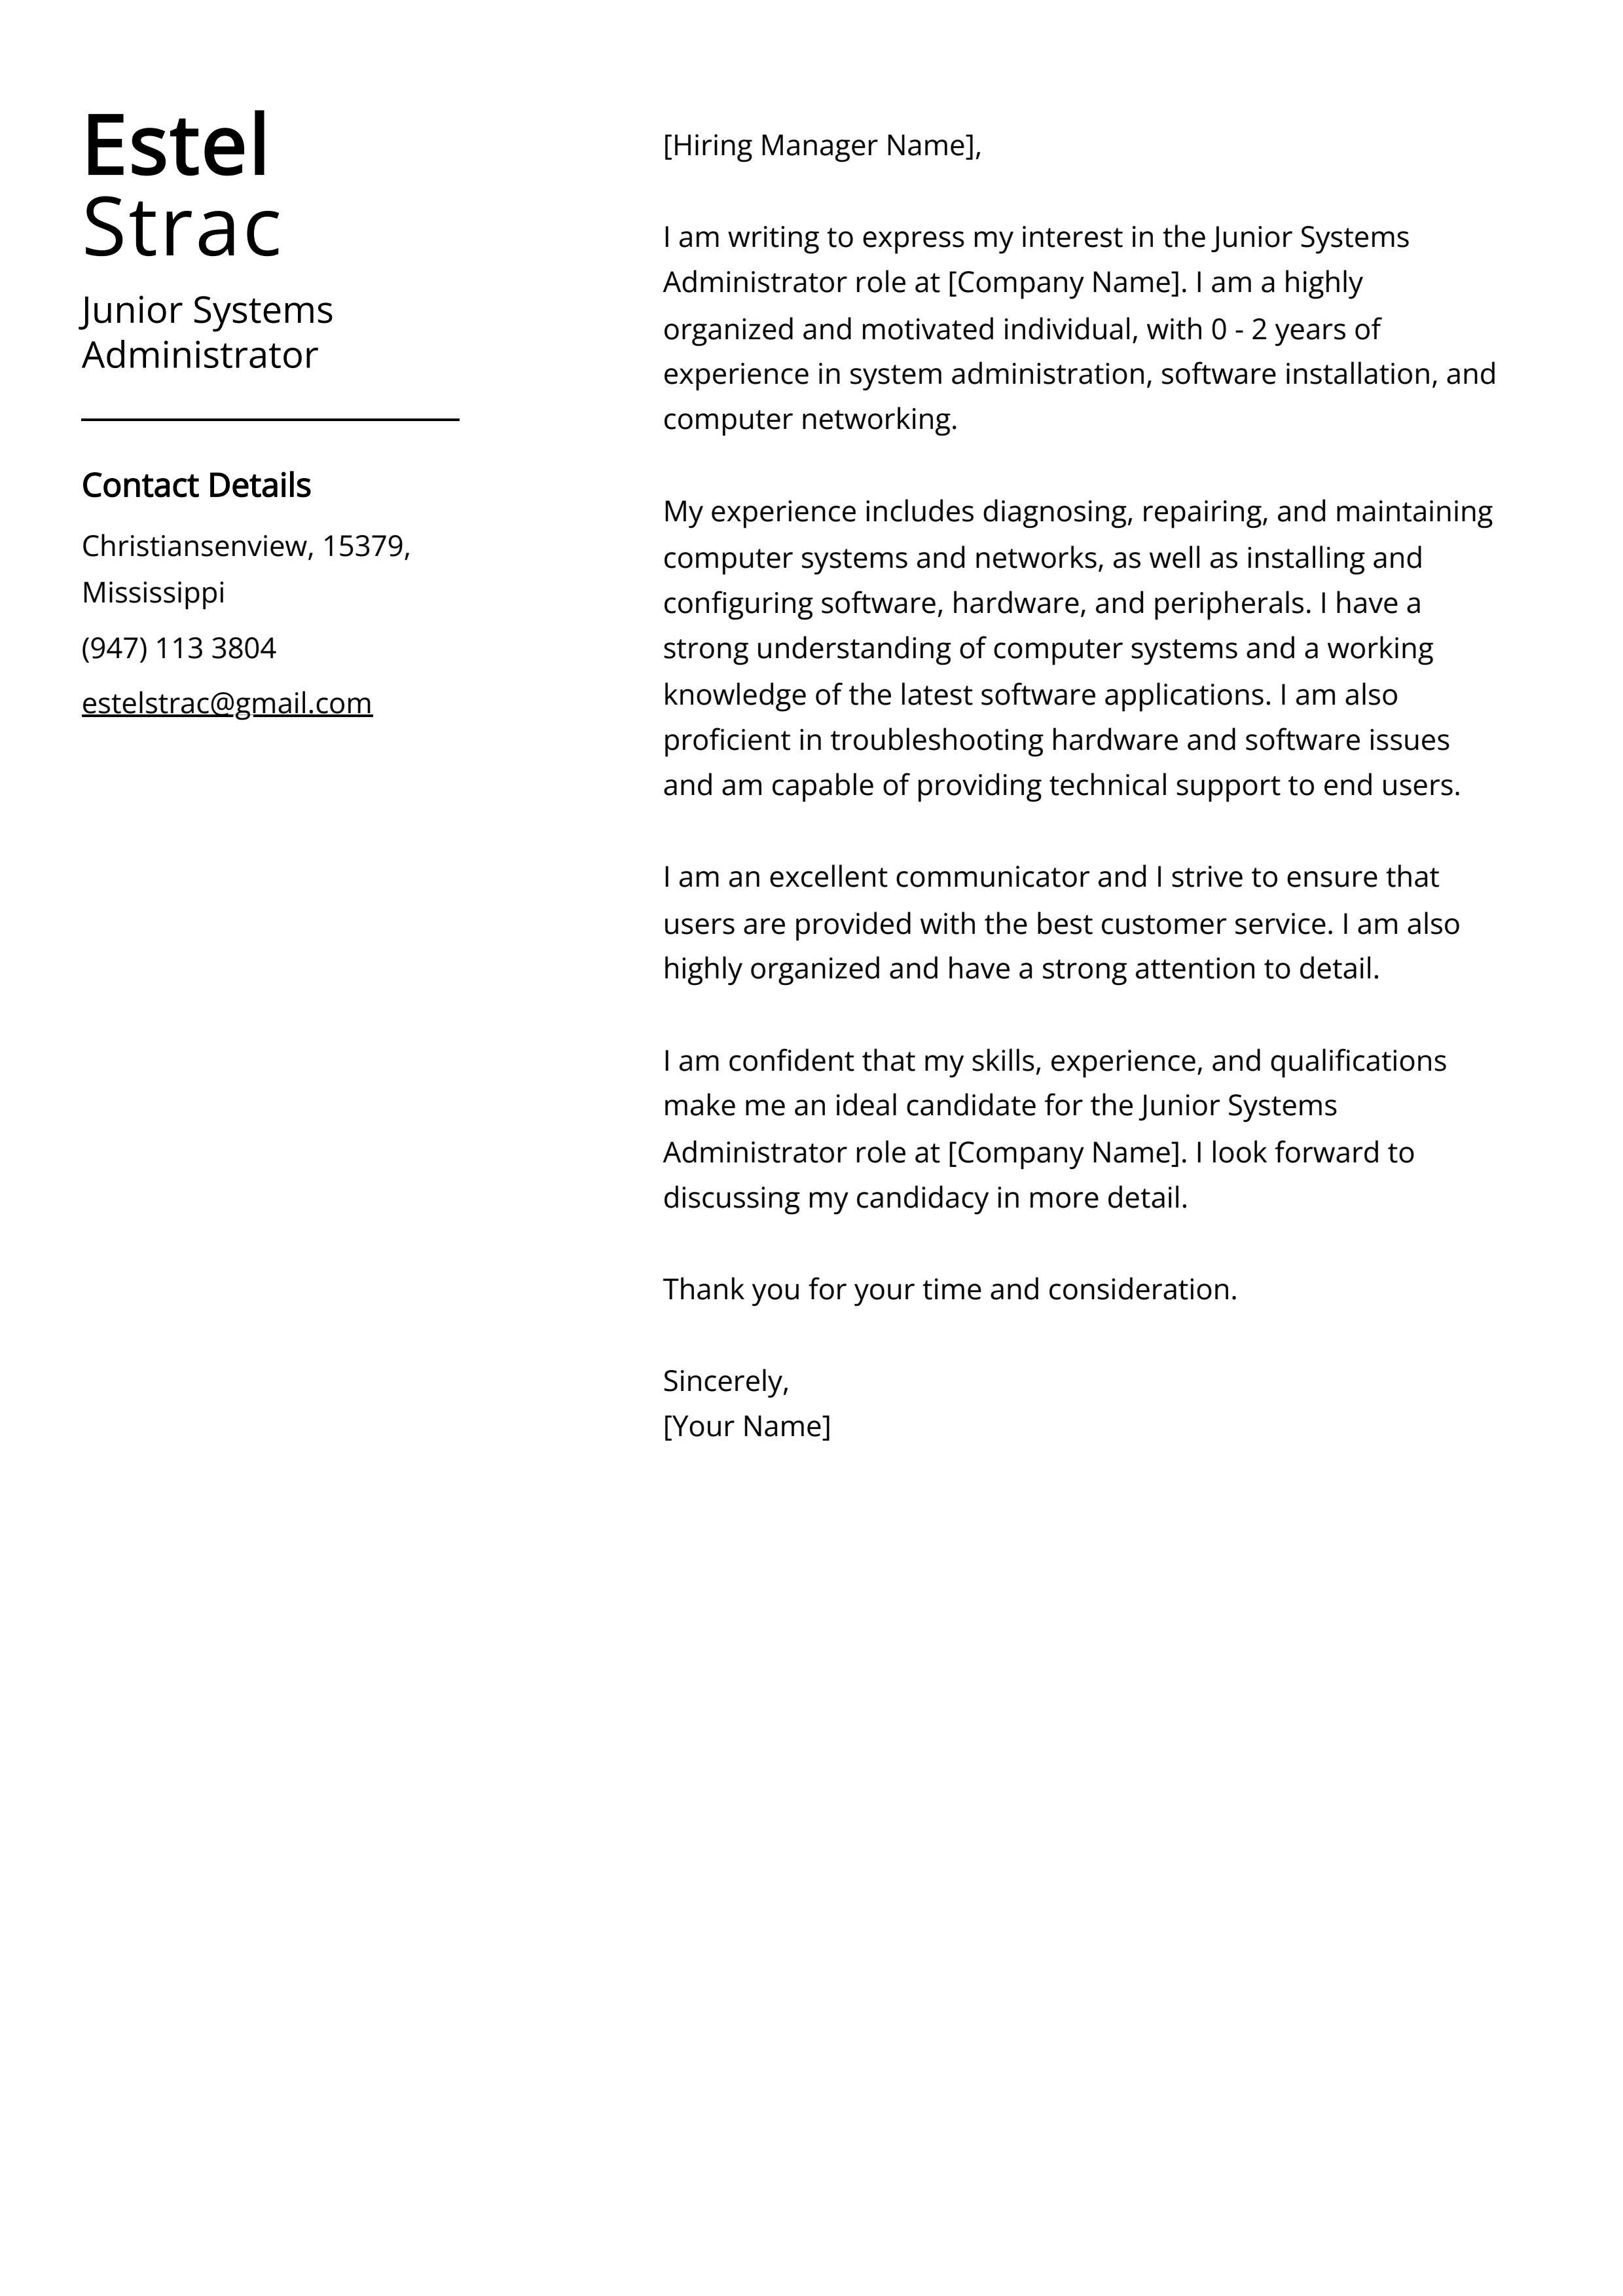 Junior Systems Administrator Cover Letter Example